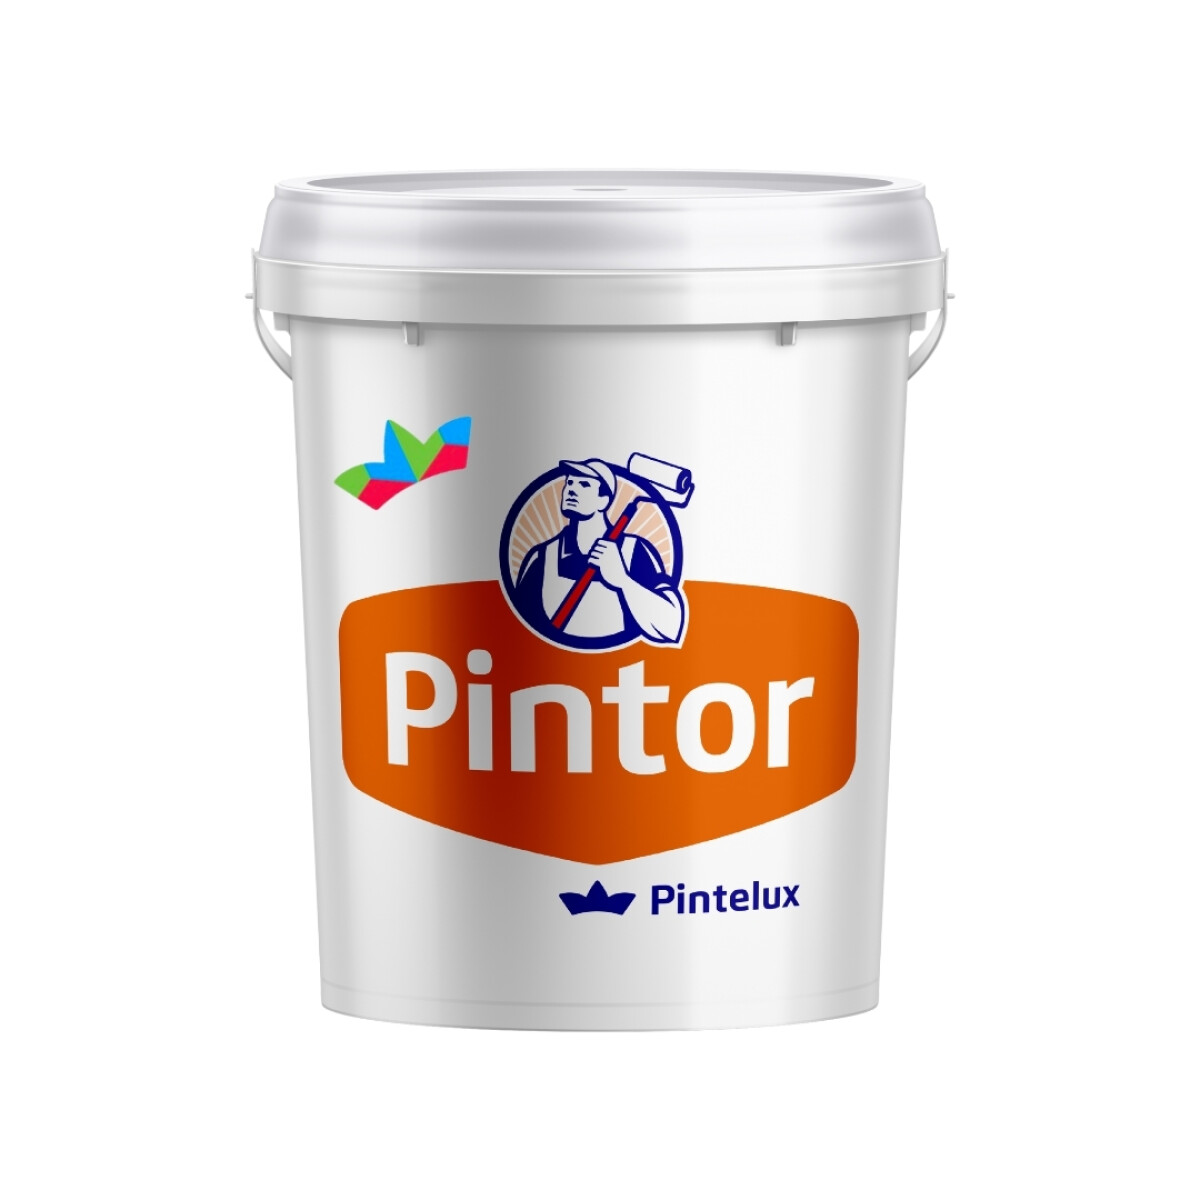 PINTOR MULTIPROPOSITO PLOMO - 3.6LTS 